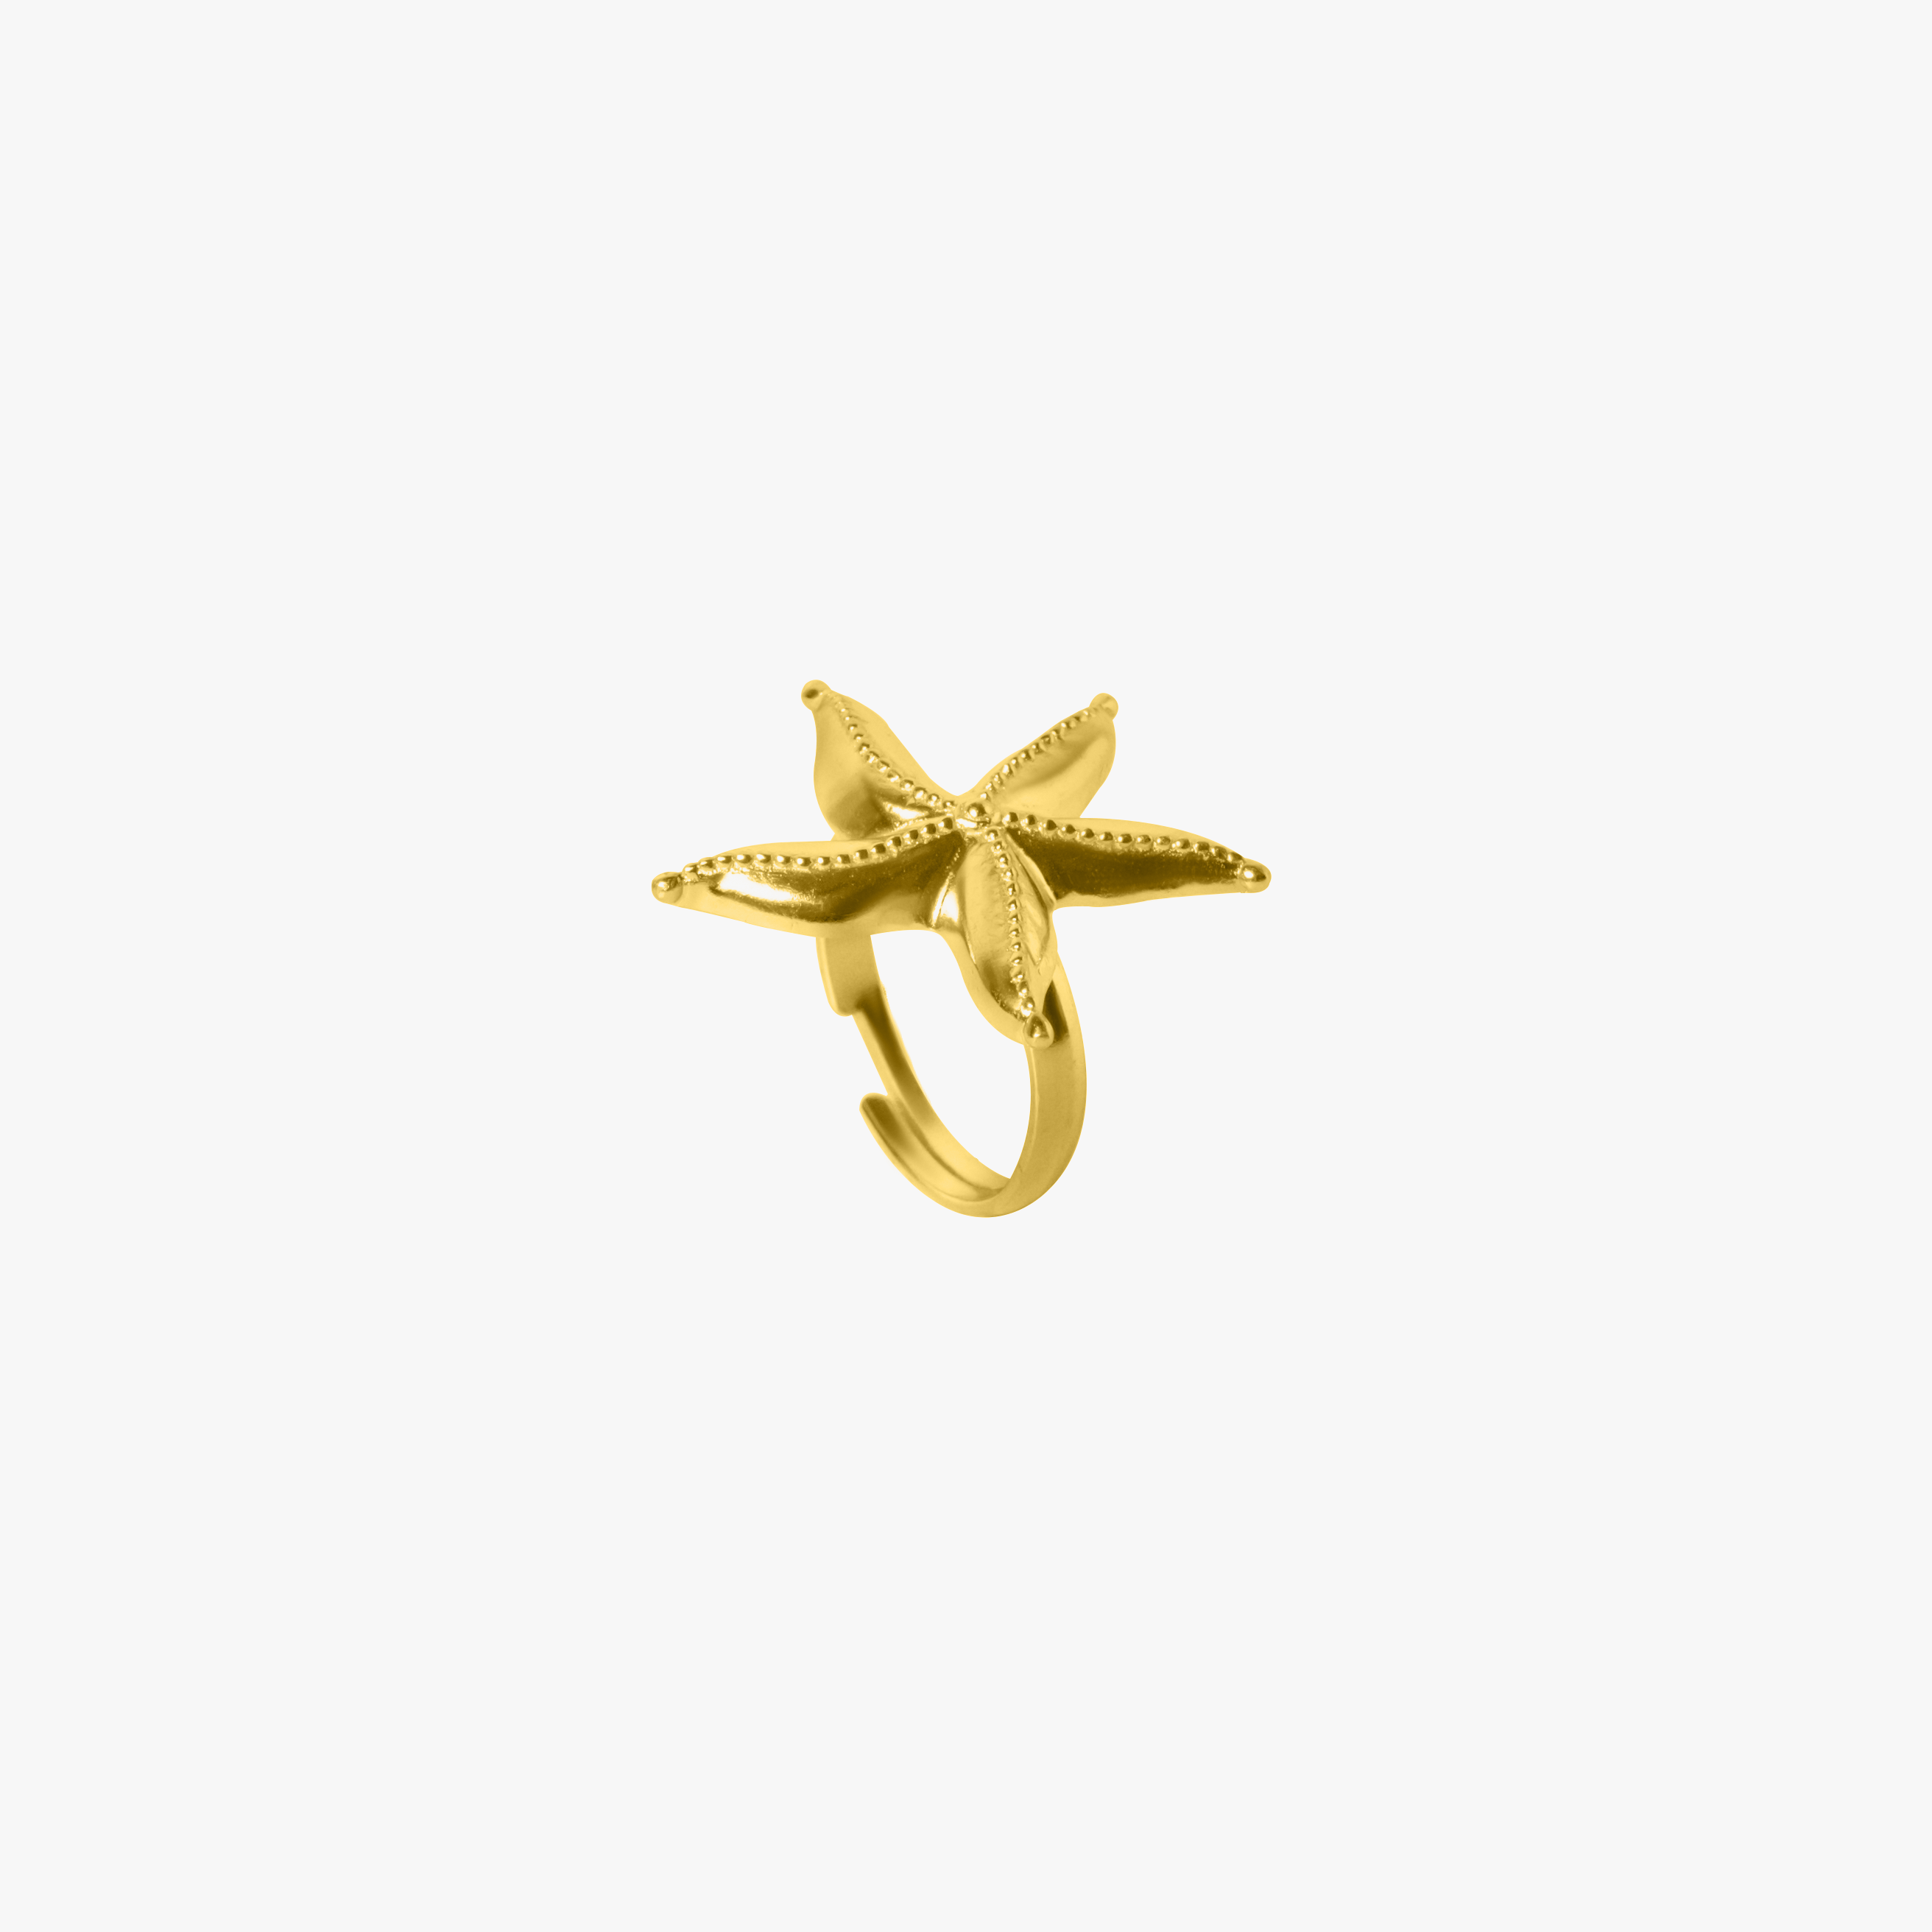 SEA STAR RING GOLD TONE , a product by Equiivalence